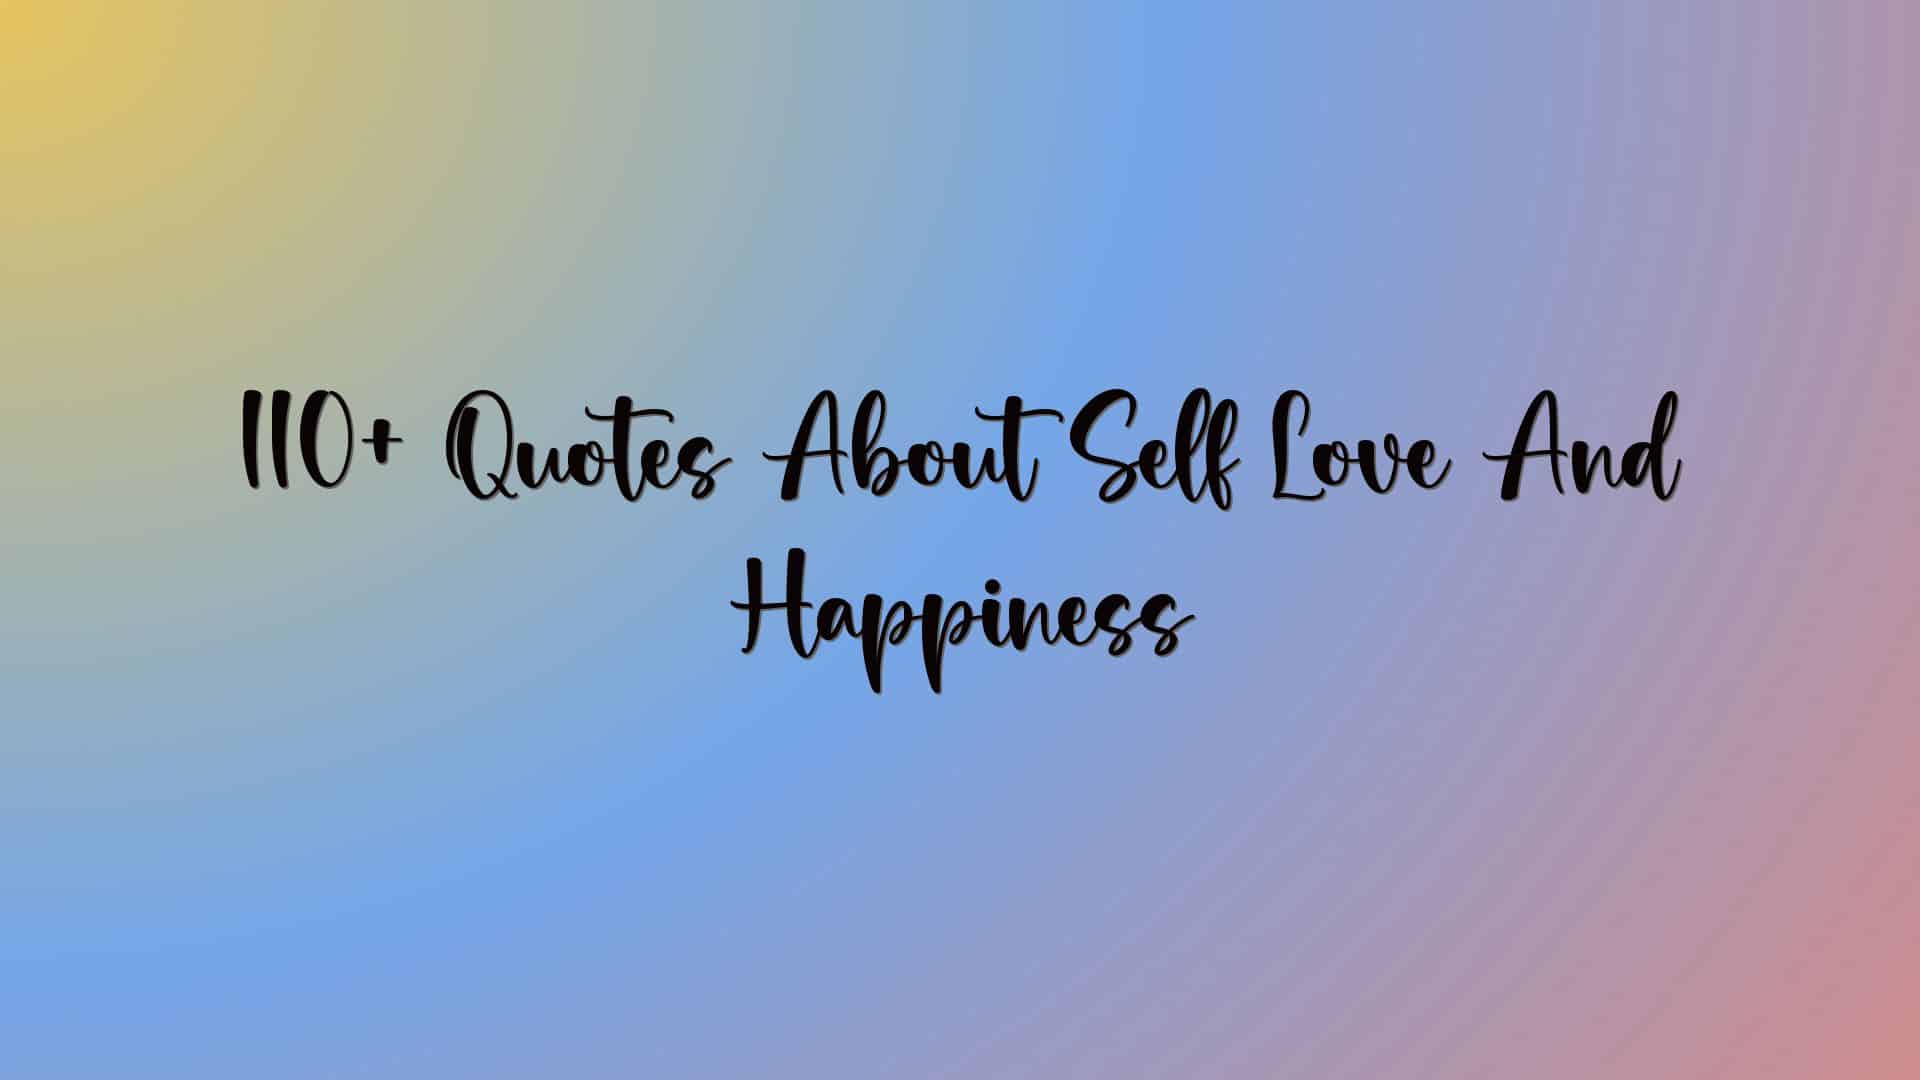 110+ Quotes About Self Love And Happiness